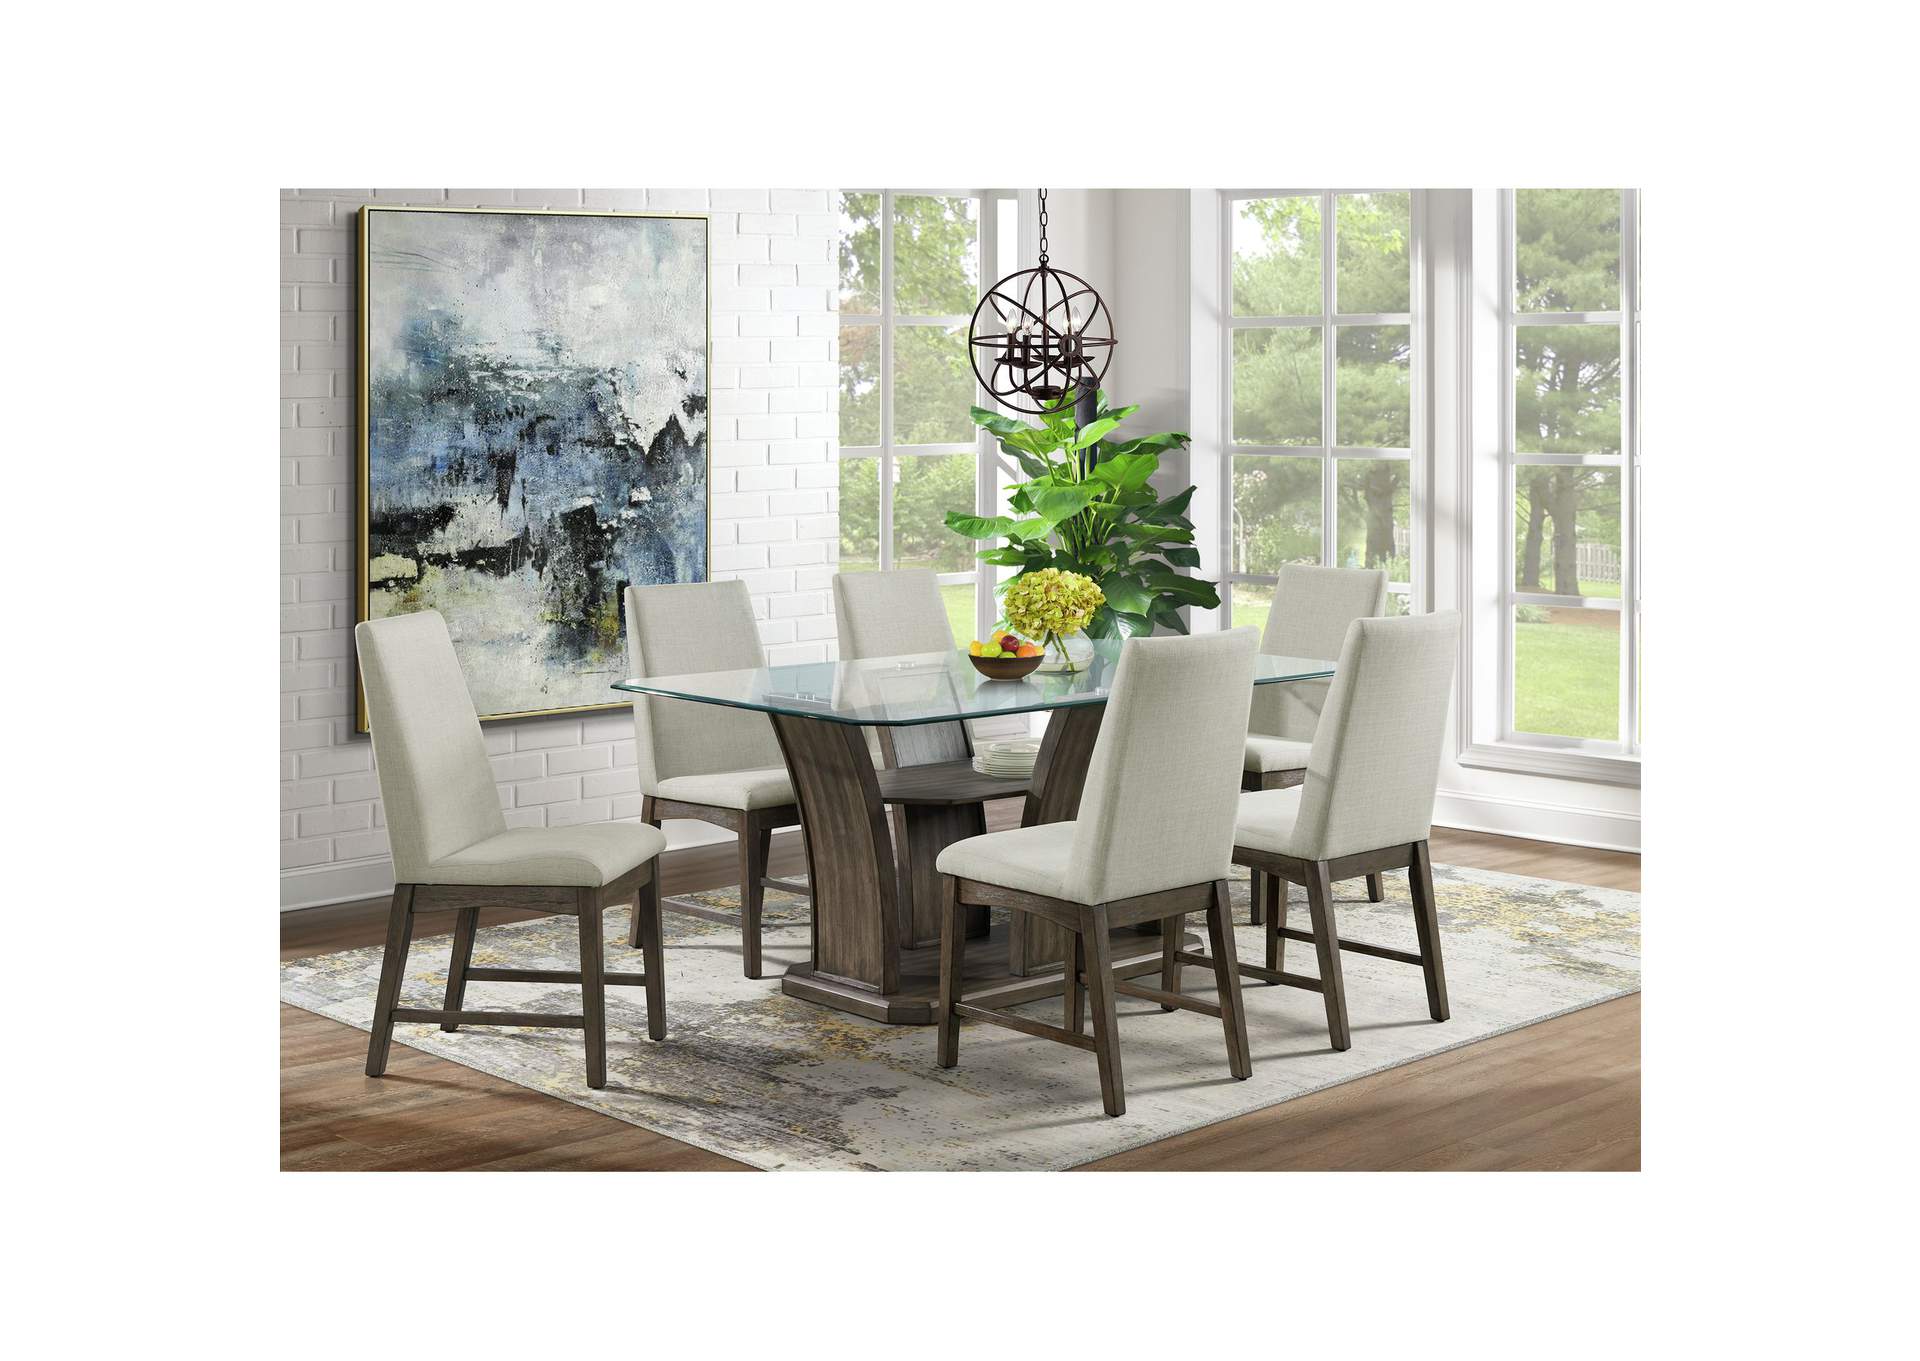 Dapper Dining Side Chair Grey Finish Two Per Carton,Elements